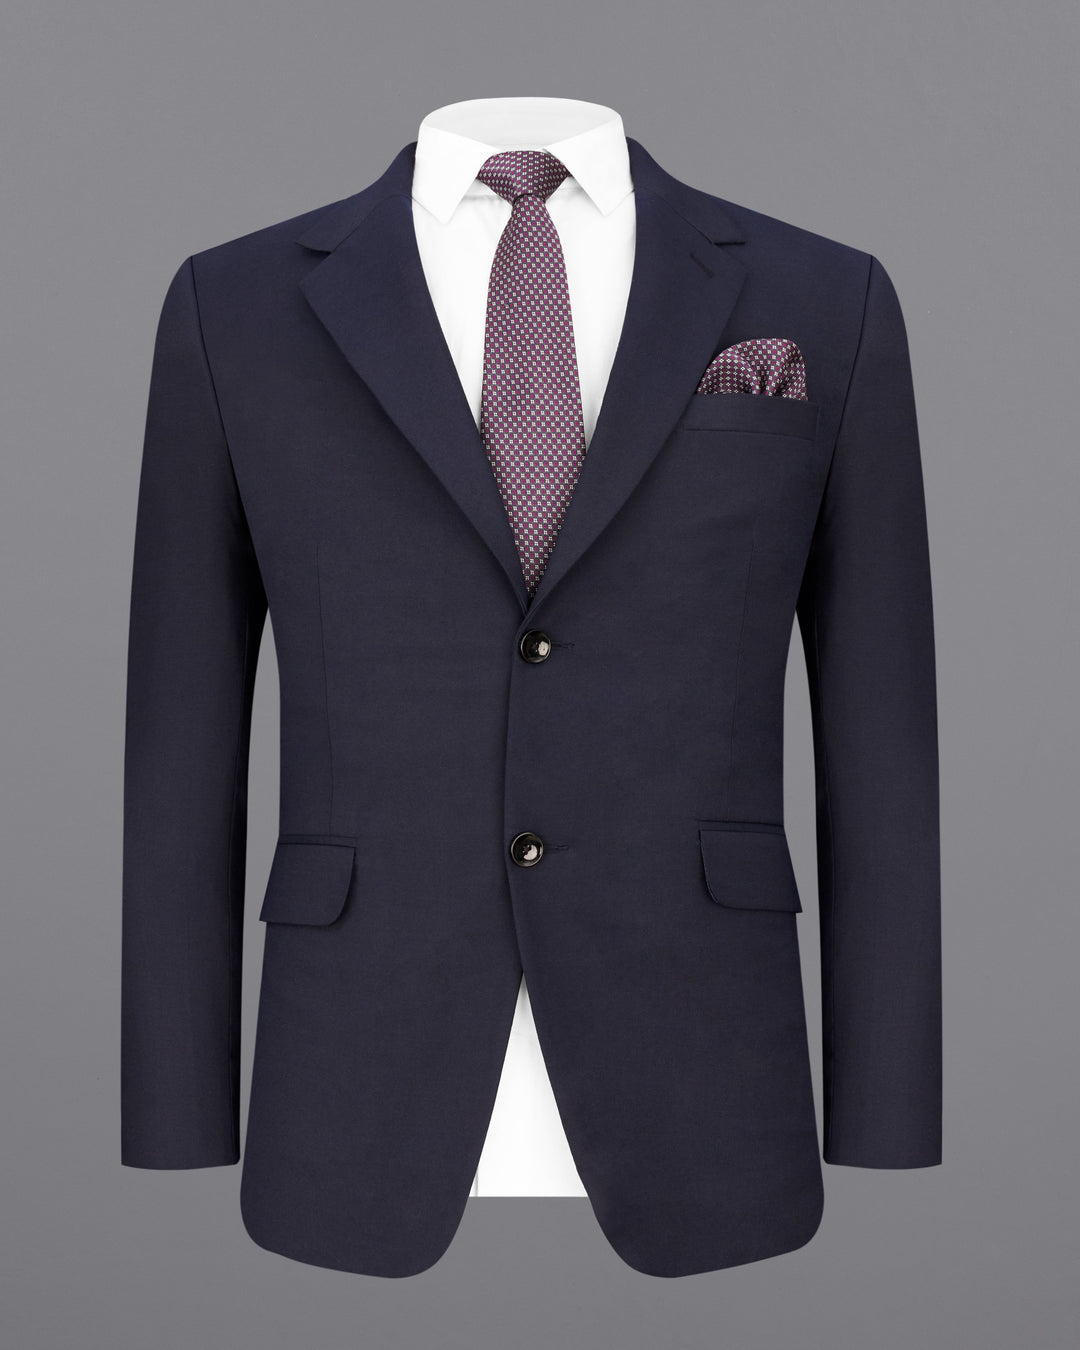 3 Suits Every Man Should Own + 2 More!! - Couture Crib | Grey suit men,  Cool suits, Designer suits for men